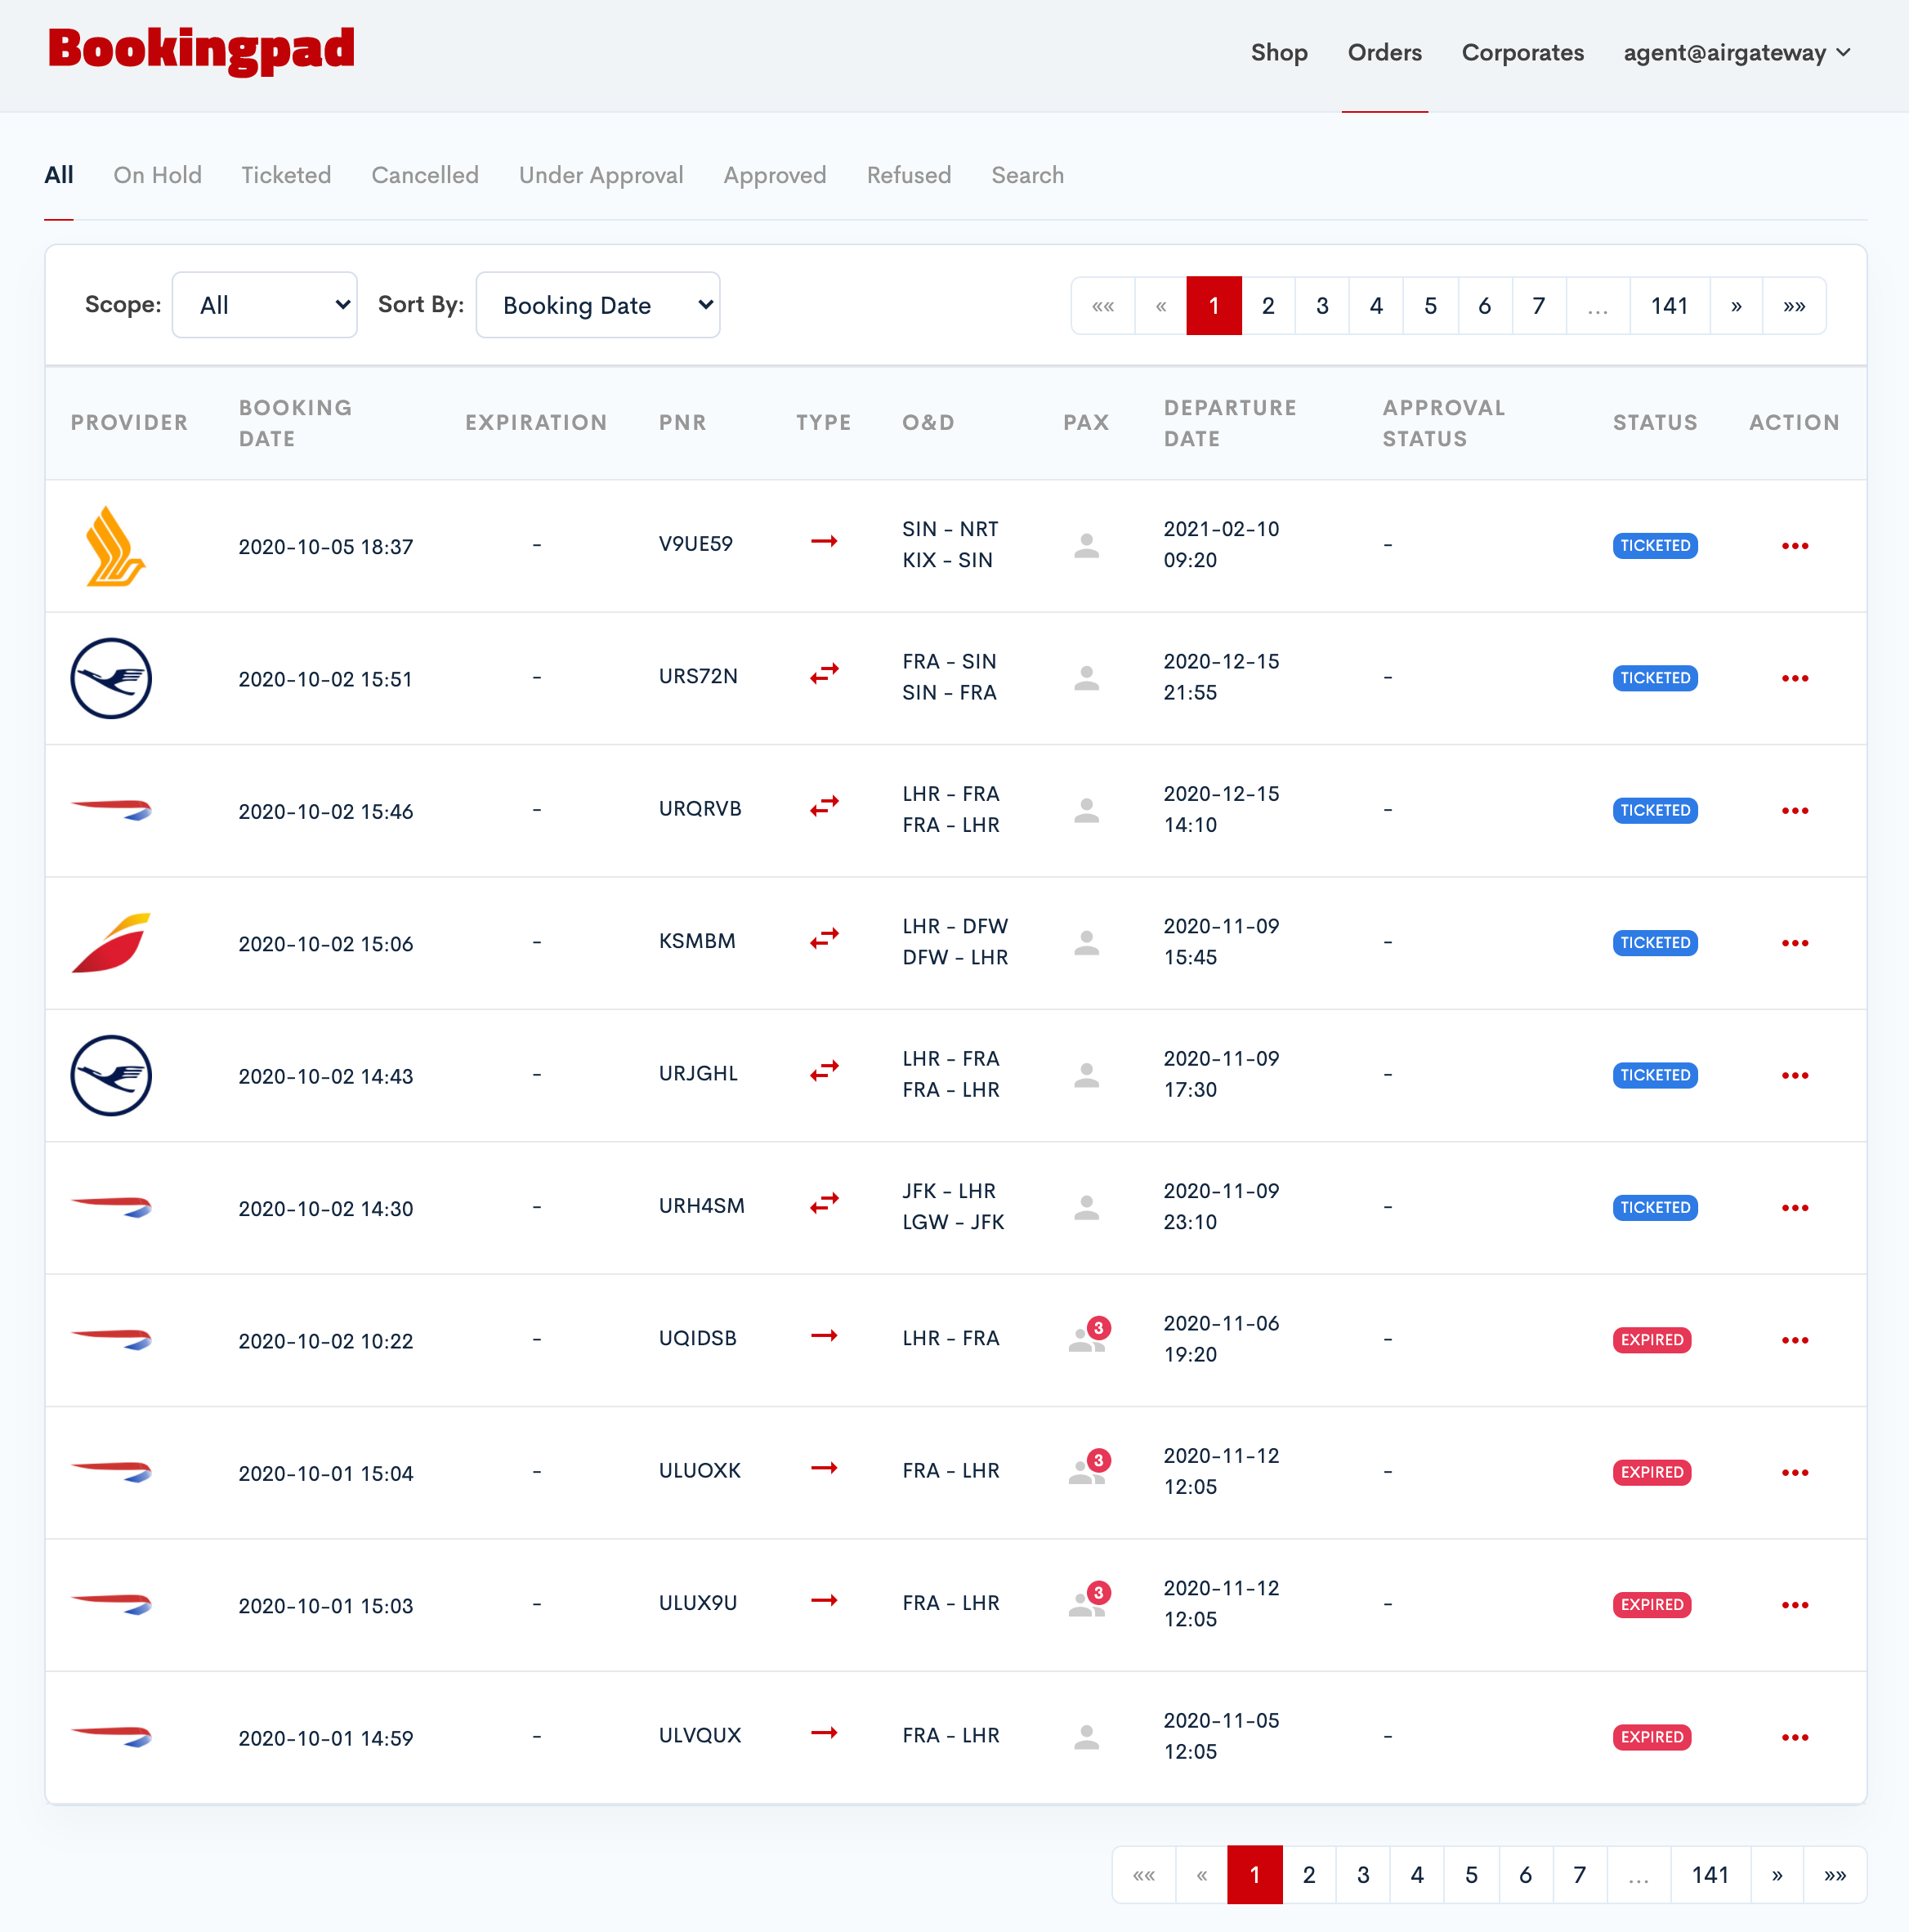 Image of Bookingpad Order Management View